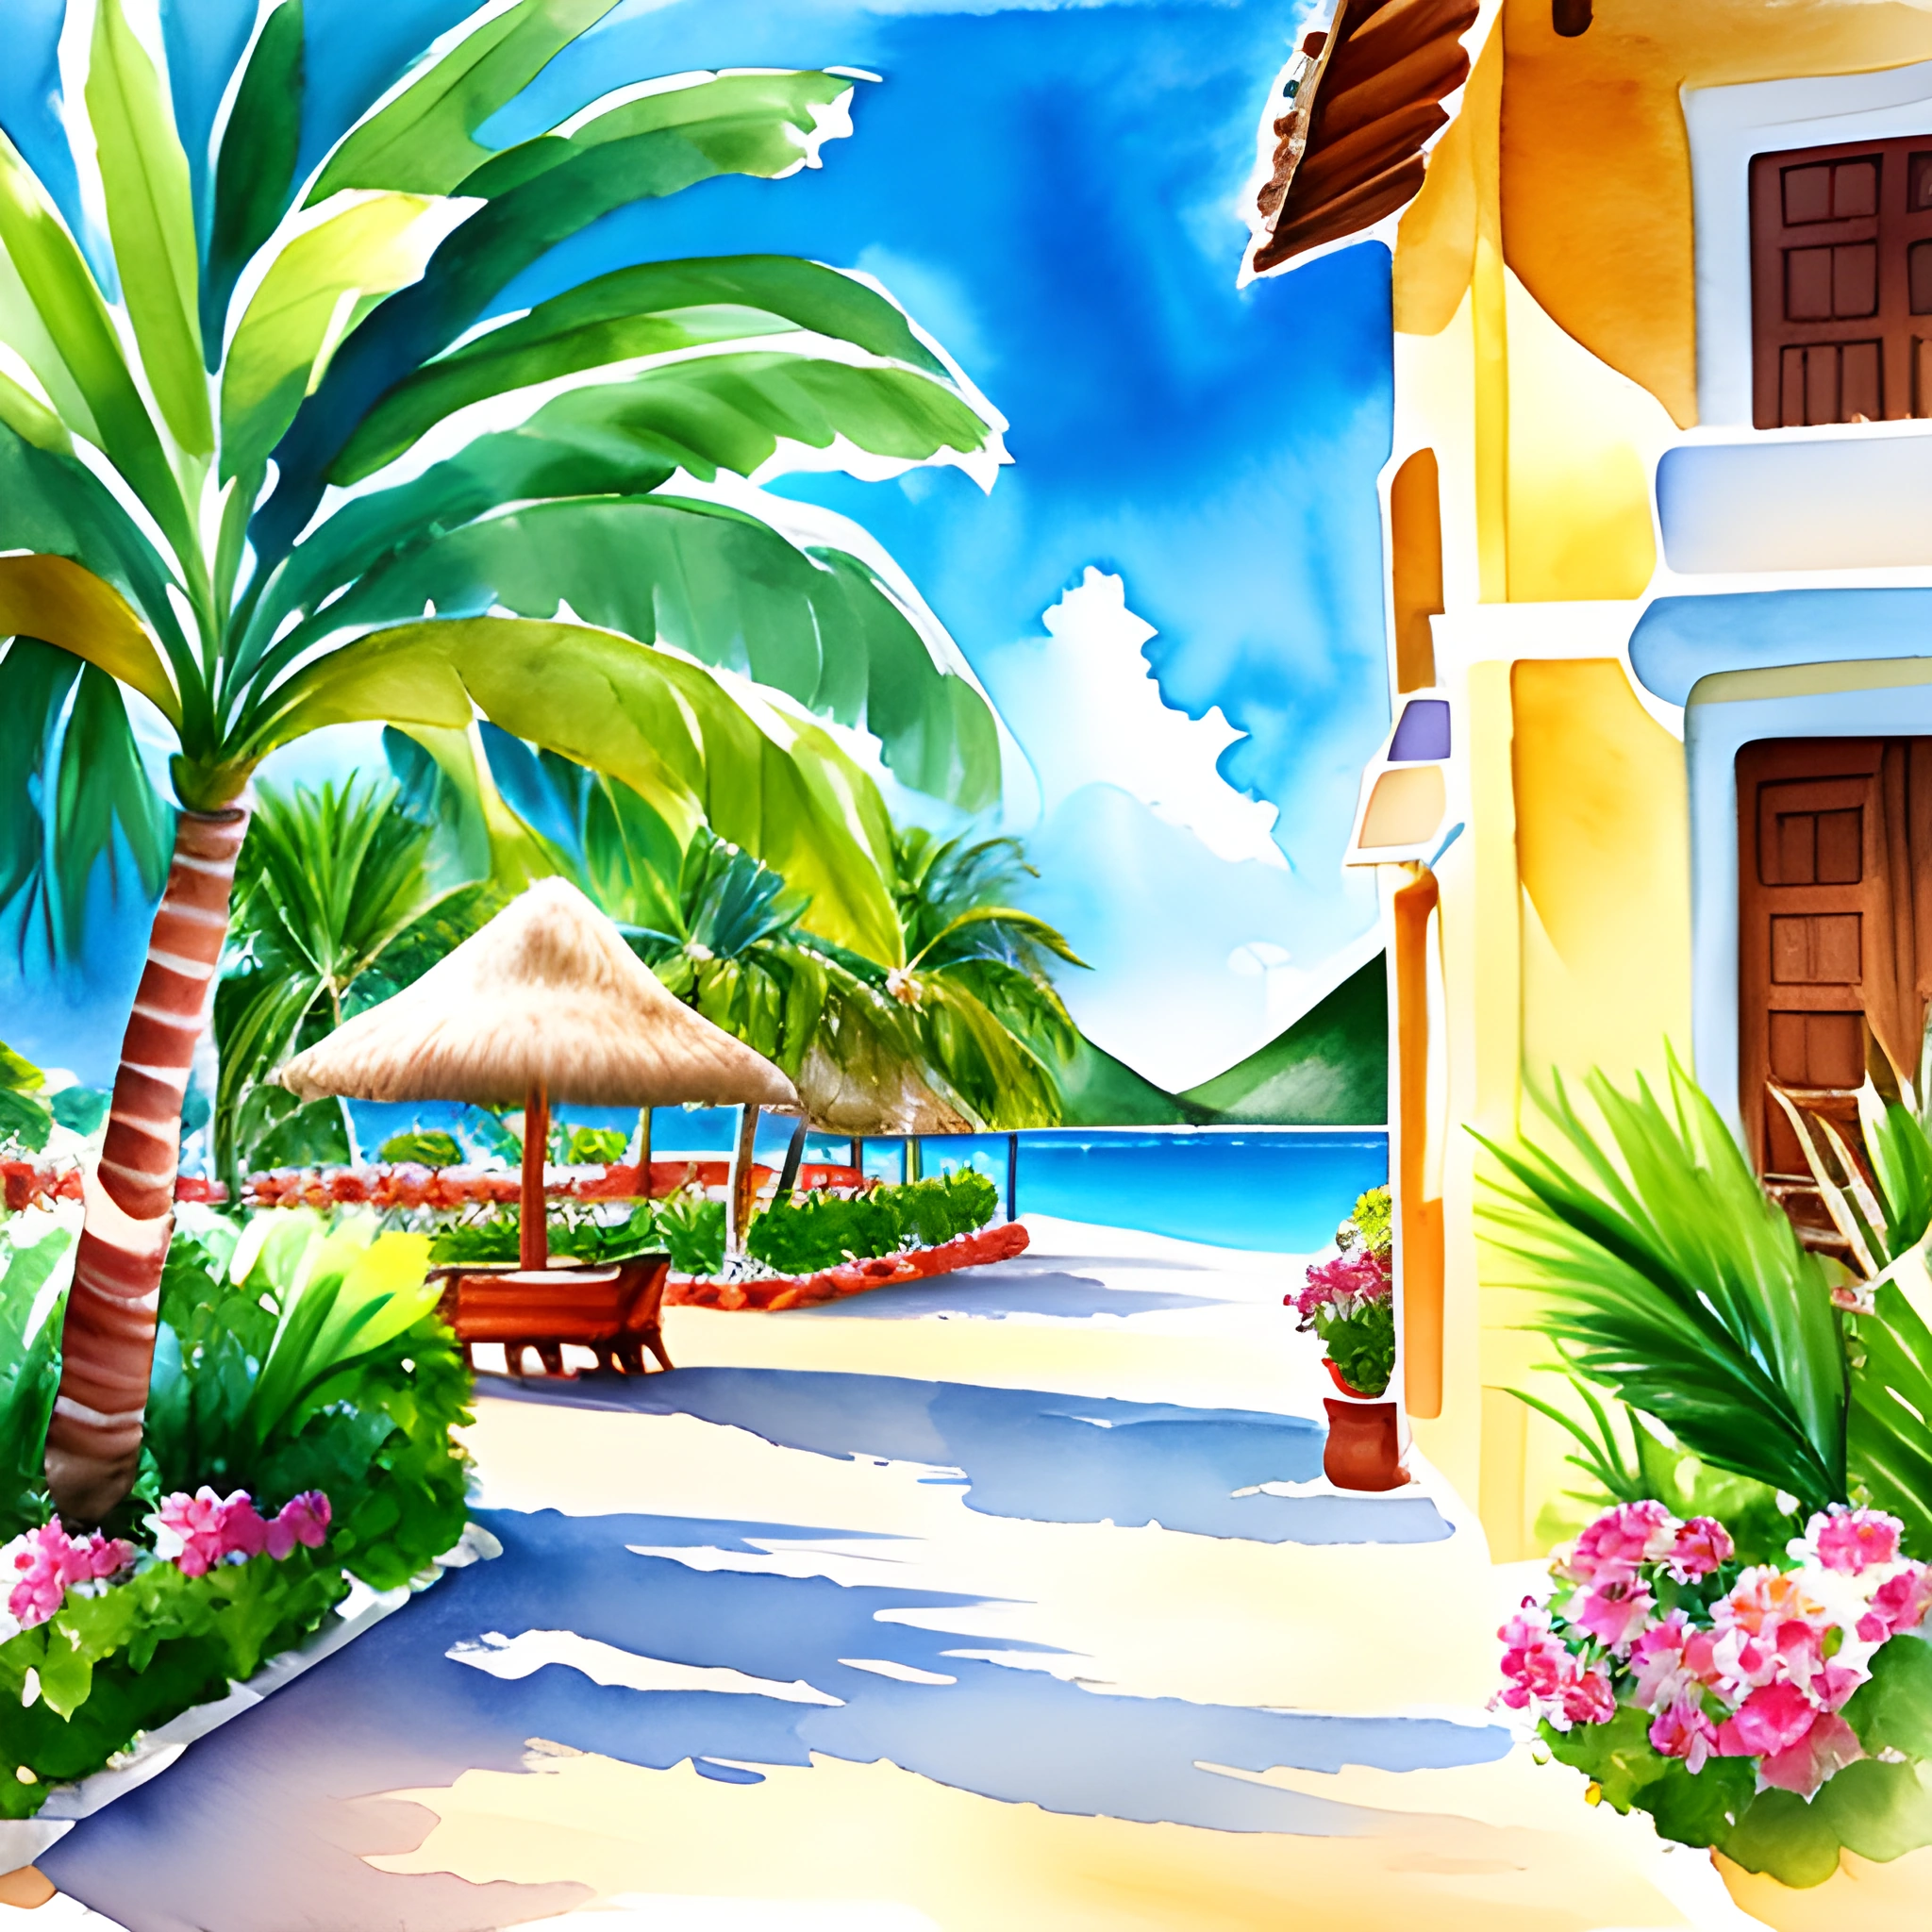 painting of a tropical beach scene with palm trees and a bench